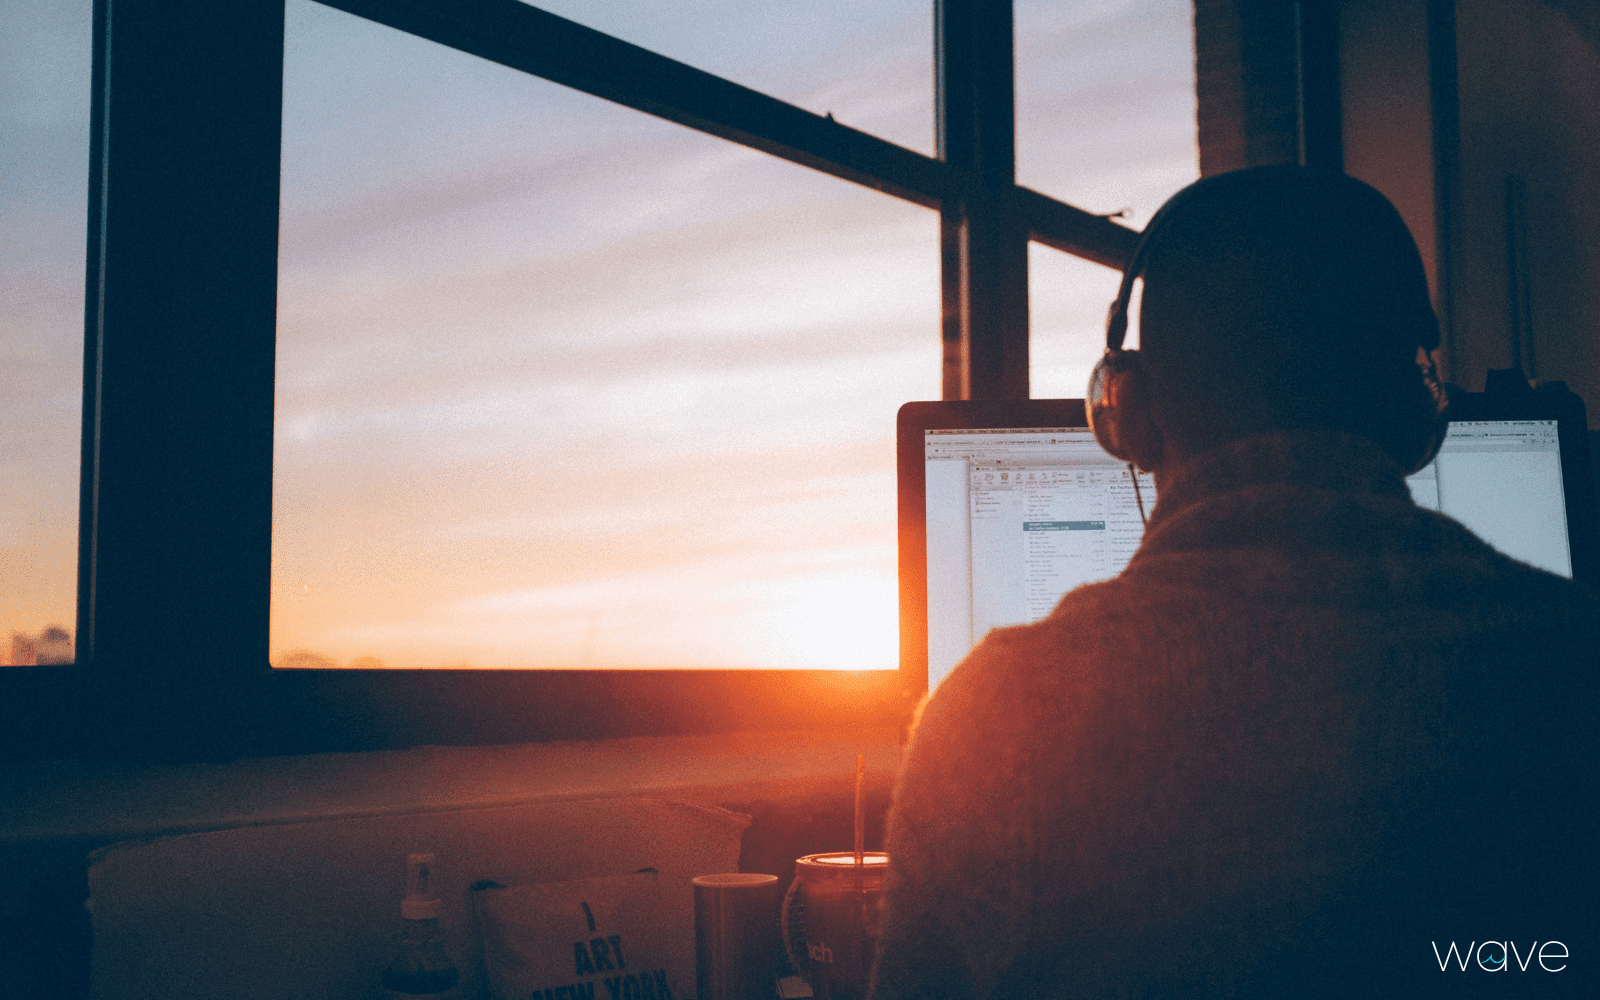 A person wearing headphones is using the computer in front of a window. The sun is setting.